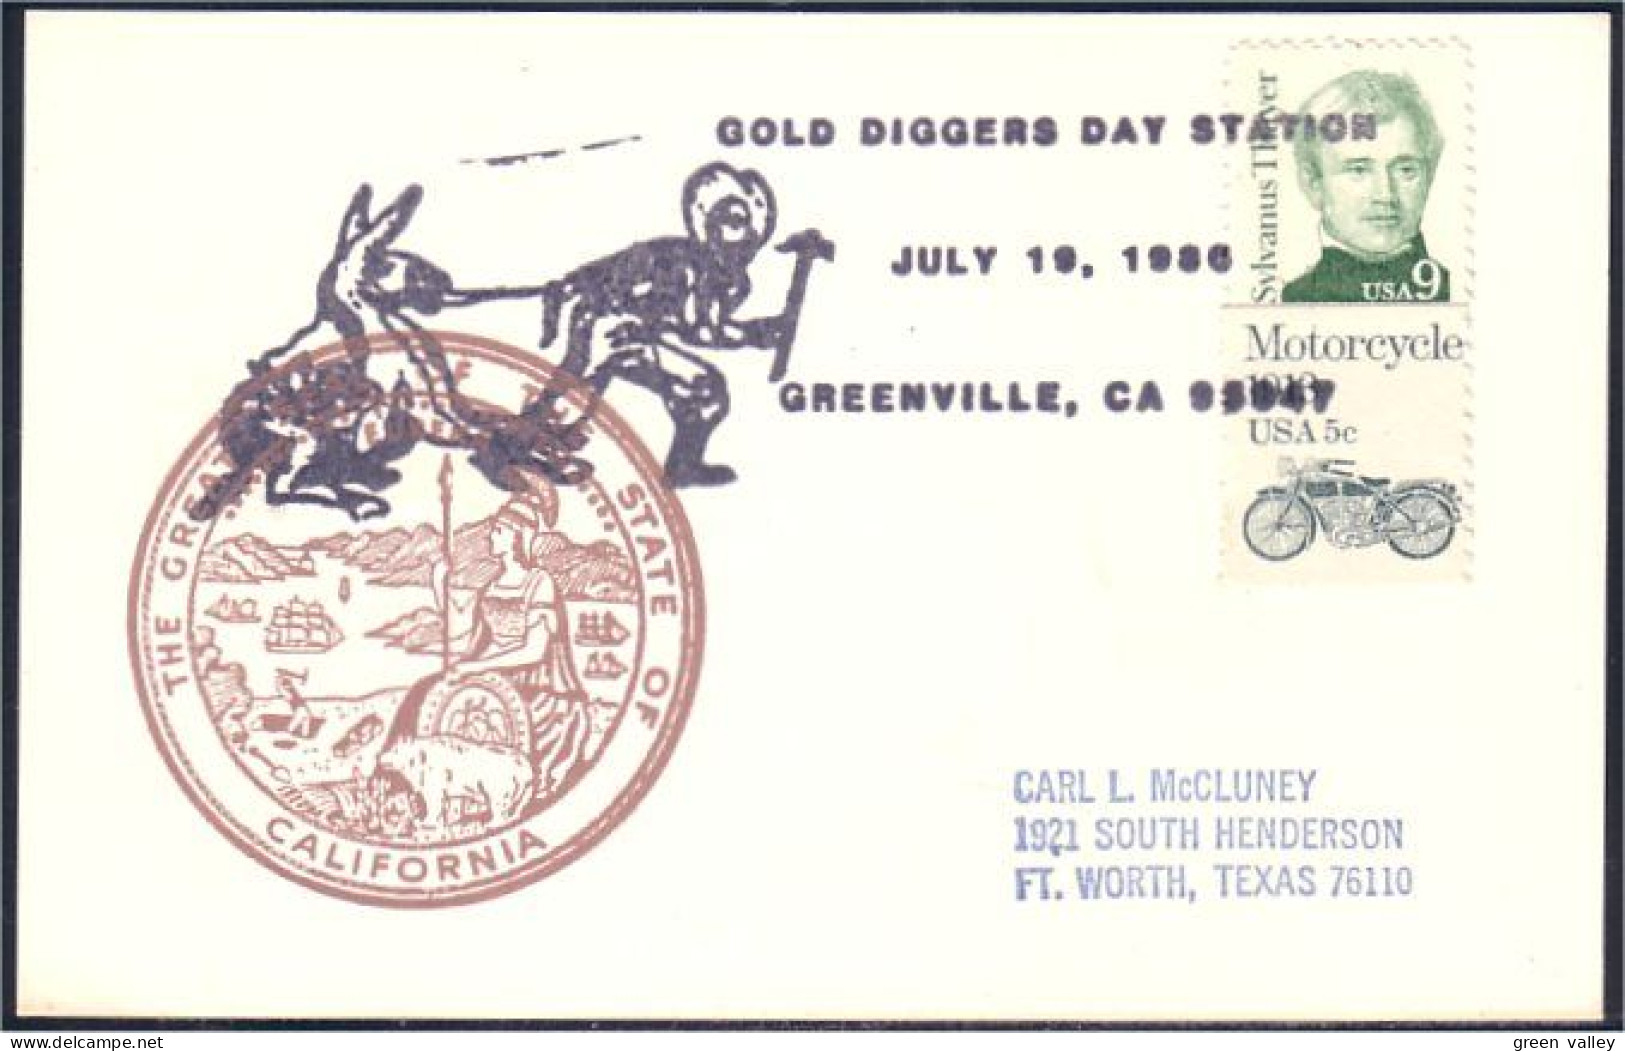 US Postcard Gold Diggers Day Greenville, CA JULY 19, 1986 ( A91 659) - Minerals